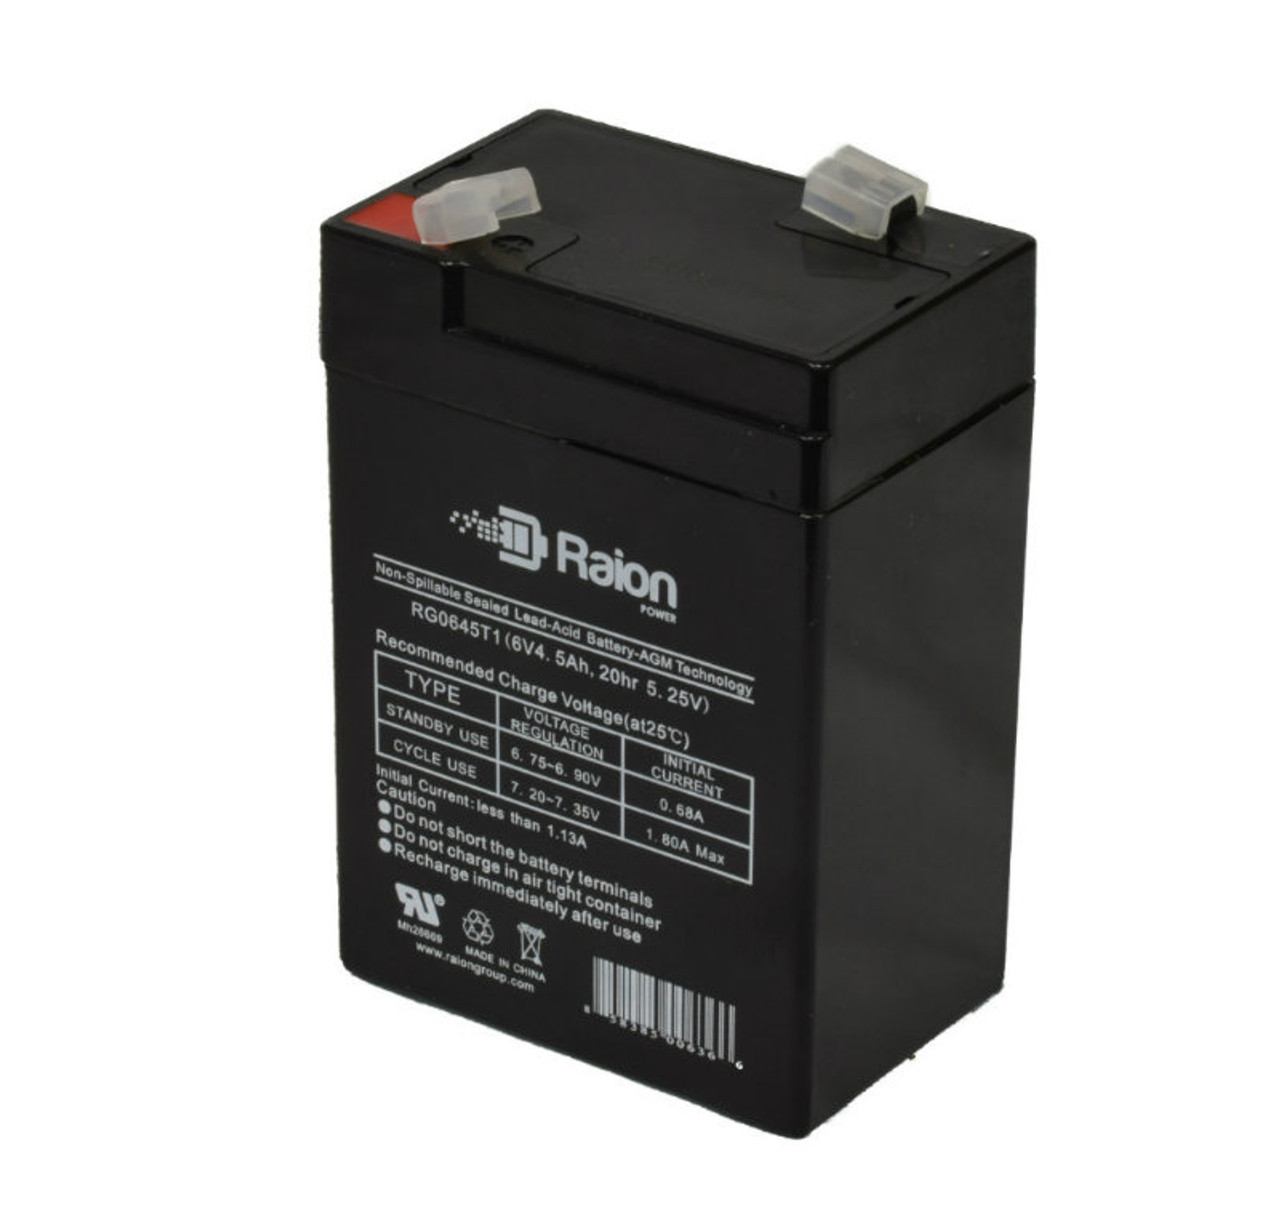 Raion Power RG0645T1 6V 4.5Ah Replacement Battery Cartridge for Cellpower CP 4-6